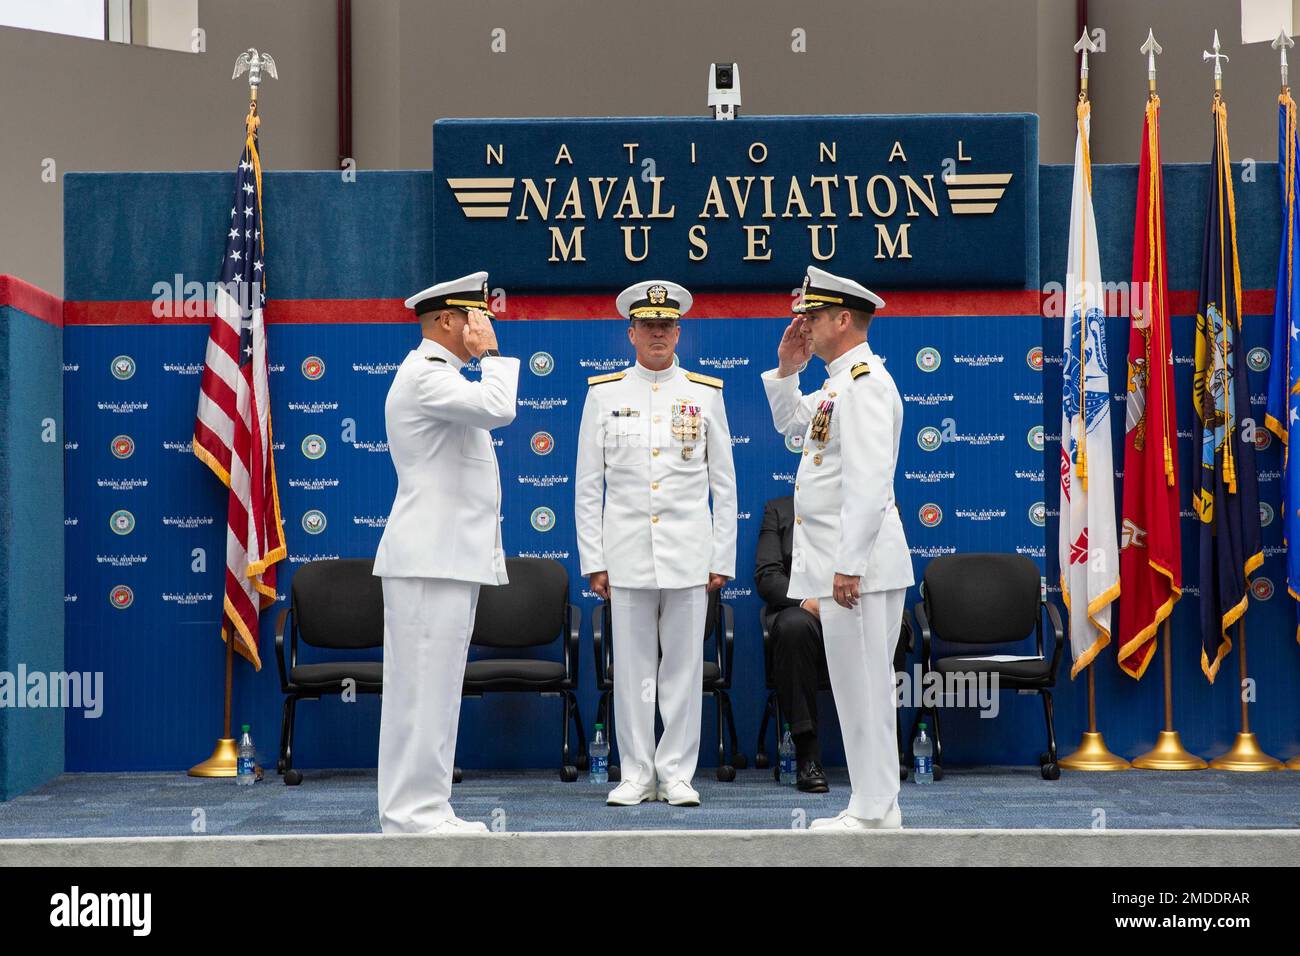 Capt. Christopher G. Bryant, right, relieves Capt. Marc W. Ratkus, left, as commanding officer, Center for Information Warfare Training (CIWT), with Rear Adm. Pete Garvin, commander, Naval Education and Training Command, center, presiding over the change of command ceremony, July 22, 2022.  The ceremony was held at the National Naval Aviation Museum and also included a retirement ceremony as Ratkus concluded his 39-year military career. CIWT is charged with developing the future technical cadre of the Navy’s information warfare community. Stock Photo